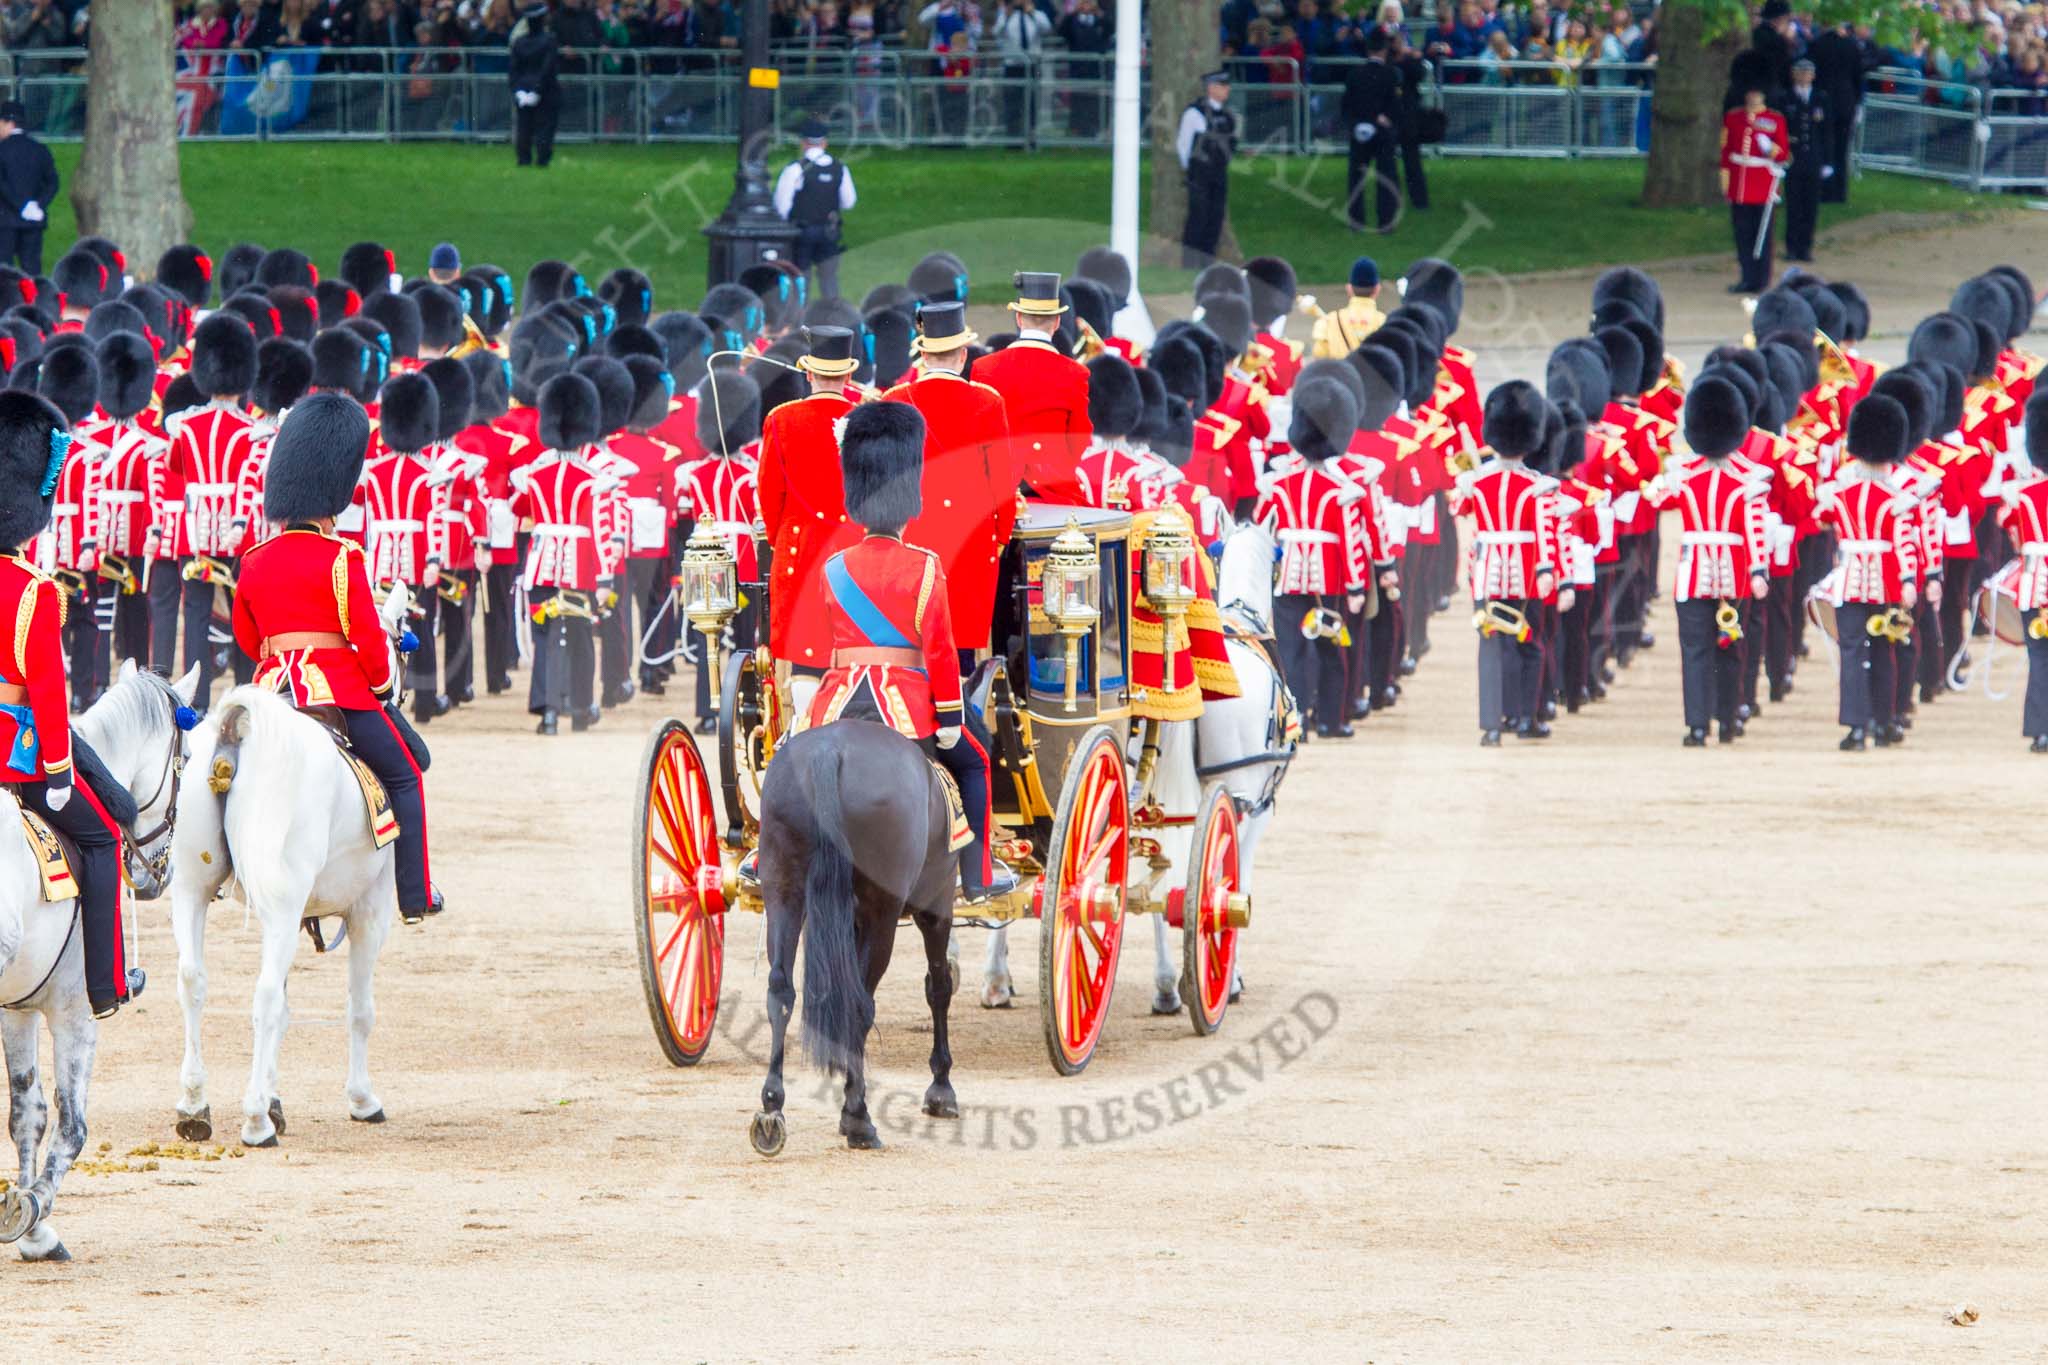 Trooping the Colour 2013: The March Off - the Massed Bands are leaving towards The Mall, followed by the glass coach accying HM The Queen and HRH The Duke of Kent. Behind the glass coach the Royal Colonels. Image #826, 15 June 2013 12:11 Horse Guards Parade, London, UK